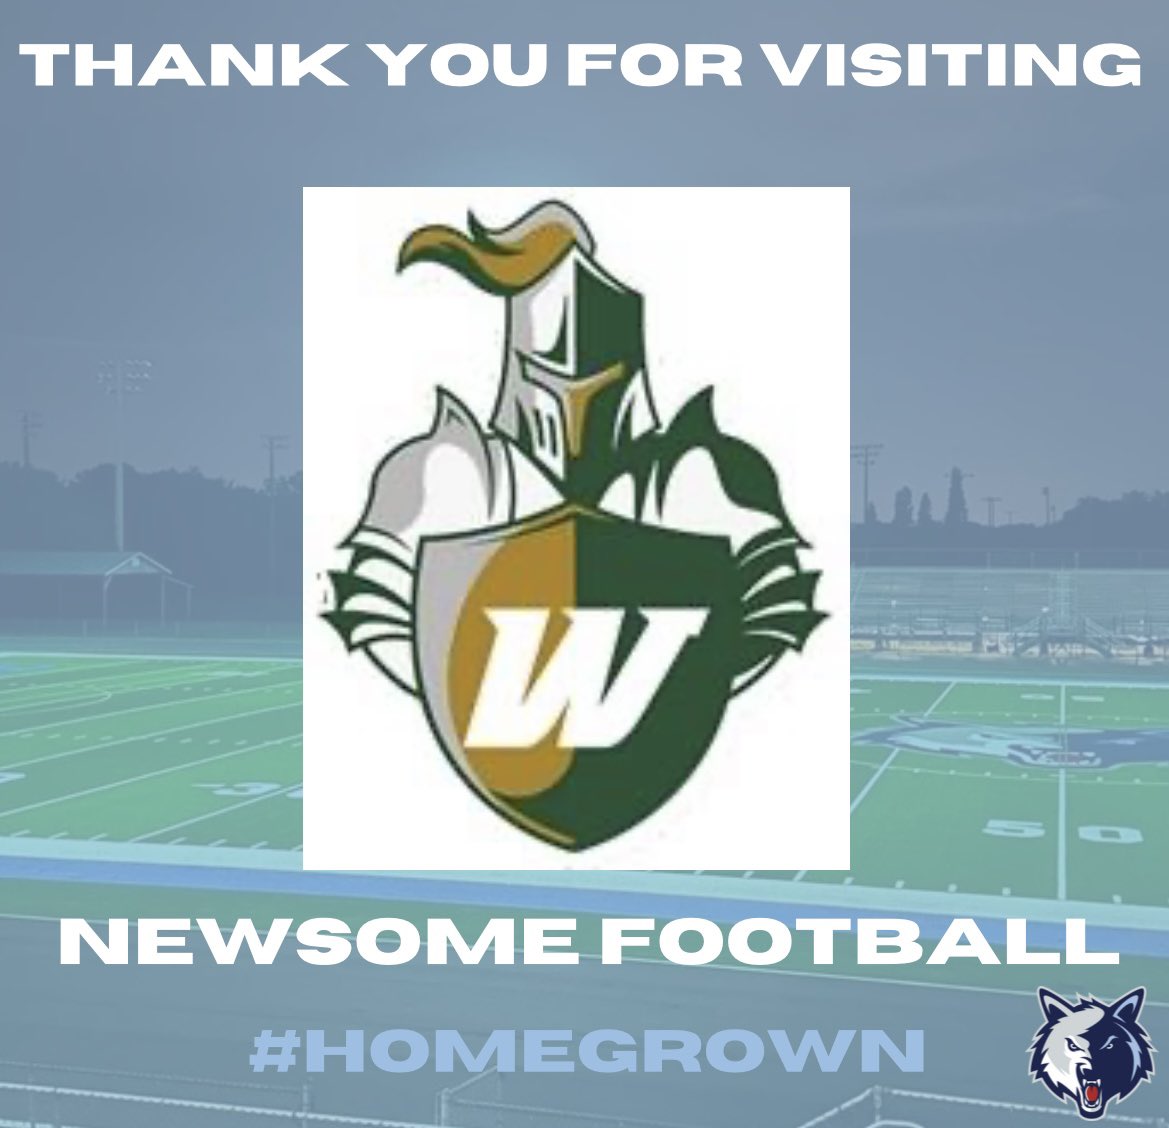 Thank you @CoachWimmer and @WebberFB for stopping by to recruit our guys!! #HOMEGROWN #Recruittheden